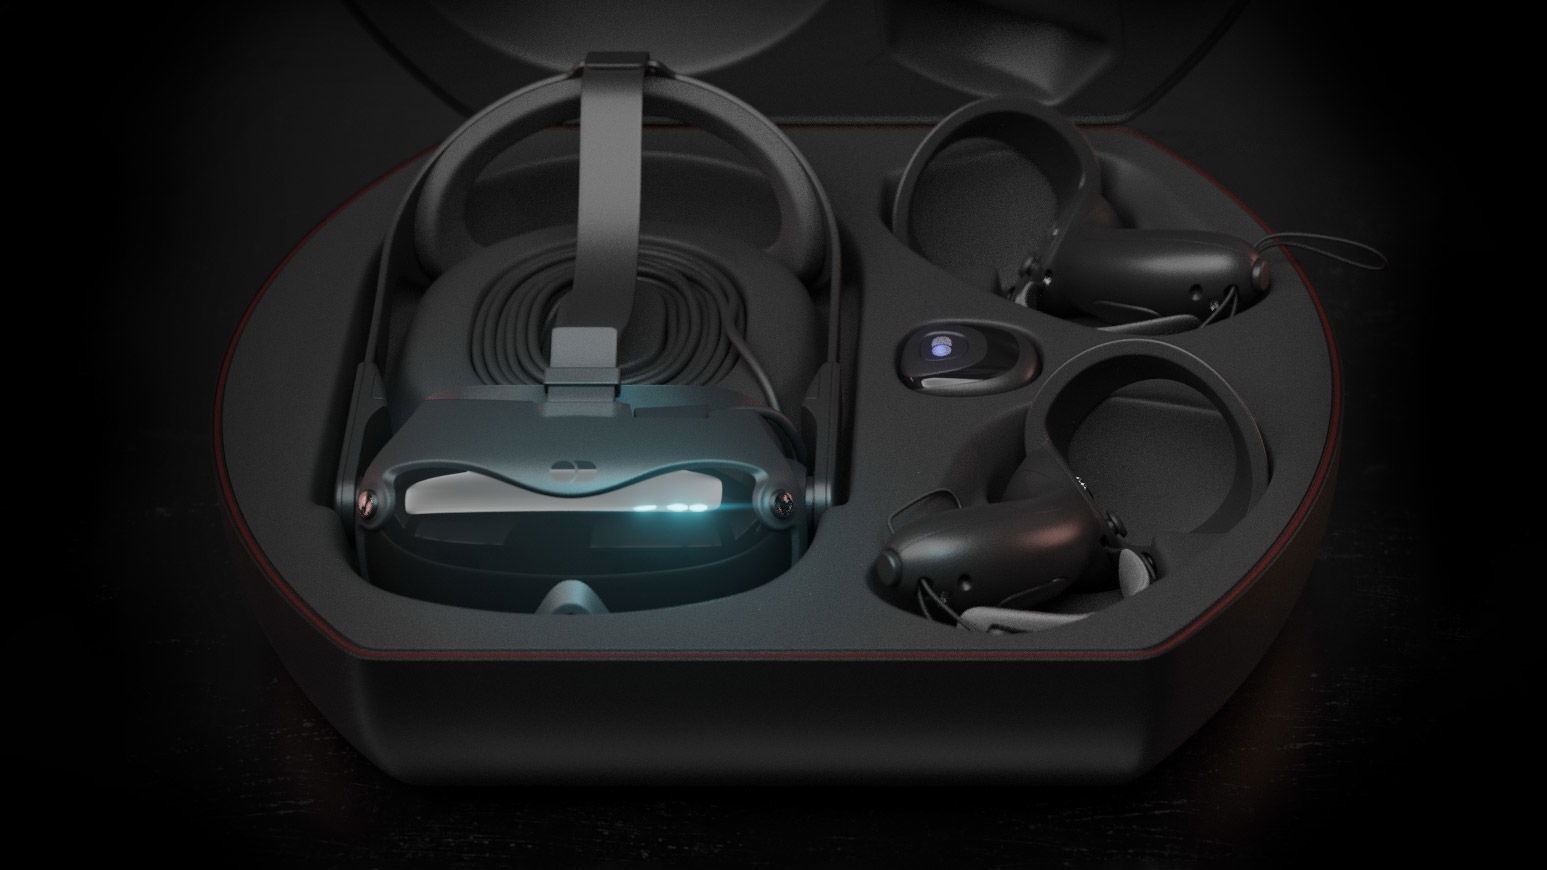 For 2021, the perfect VR headset